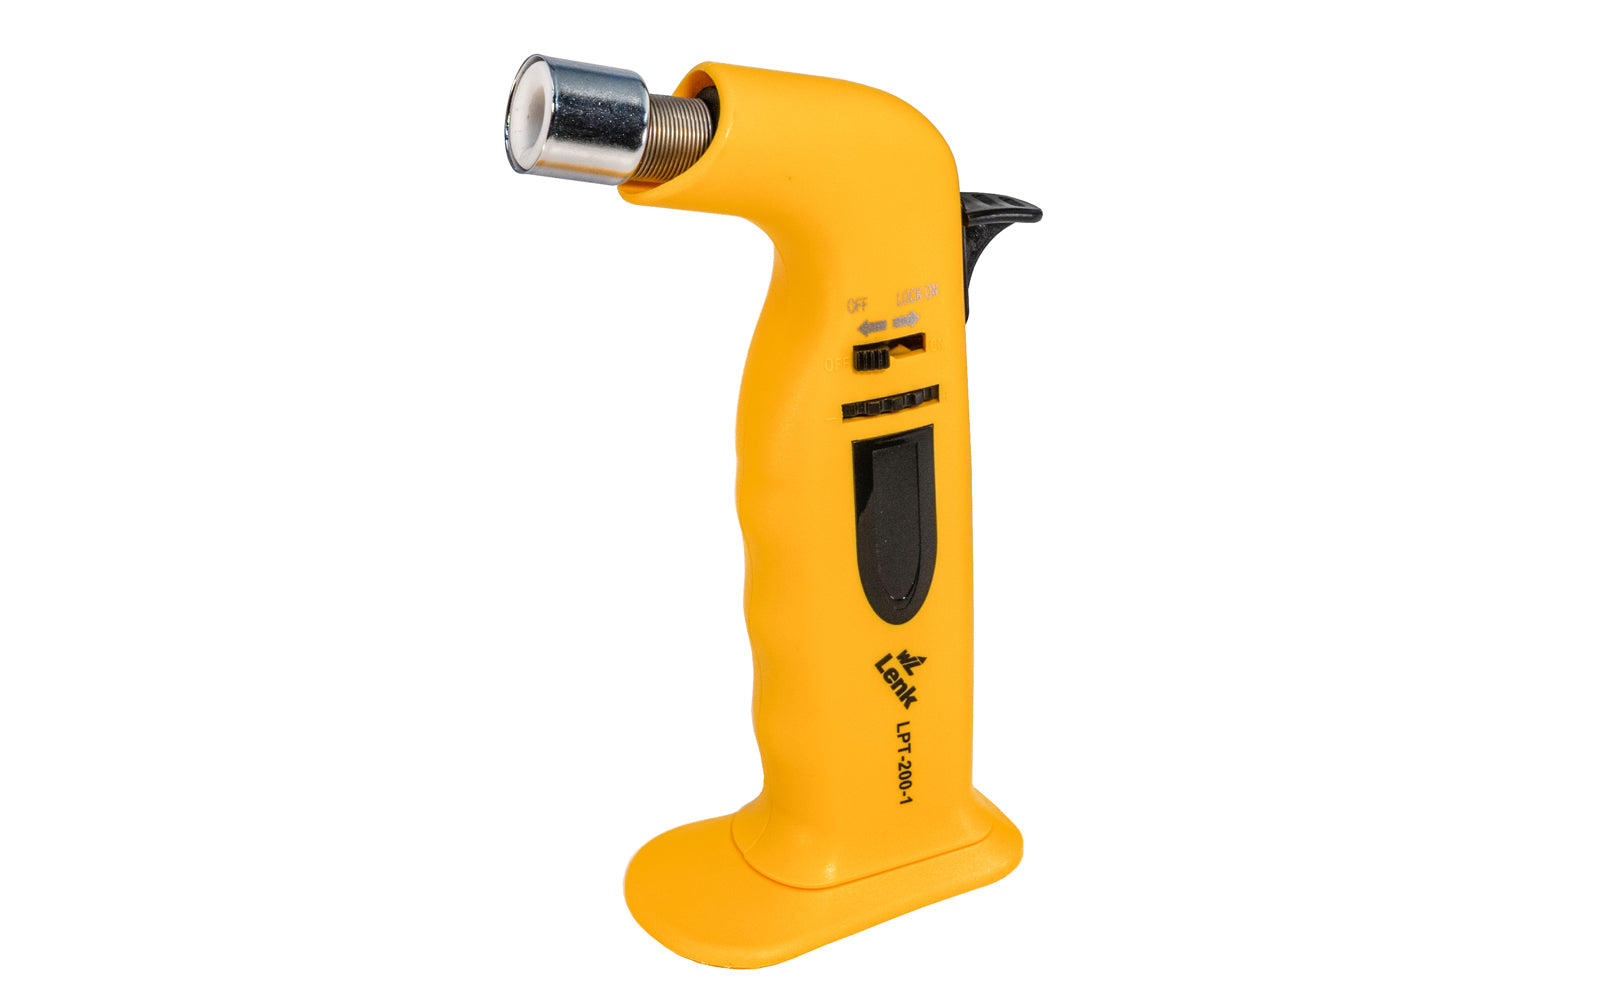 The Wall Lenk LPT-200-1 Portable Professional Torch features an adjustable high output flame. Use blow torch for industrial maintenance, tool & die shop work, automotive work, electronic repairs, lab work, brazing, soldering, plumbing, hobby & craftwork, chef's torch, etc.  Flame temperature - 2400° F - Blue flame - 048491400022